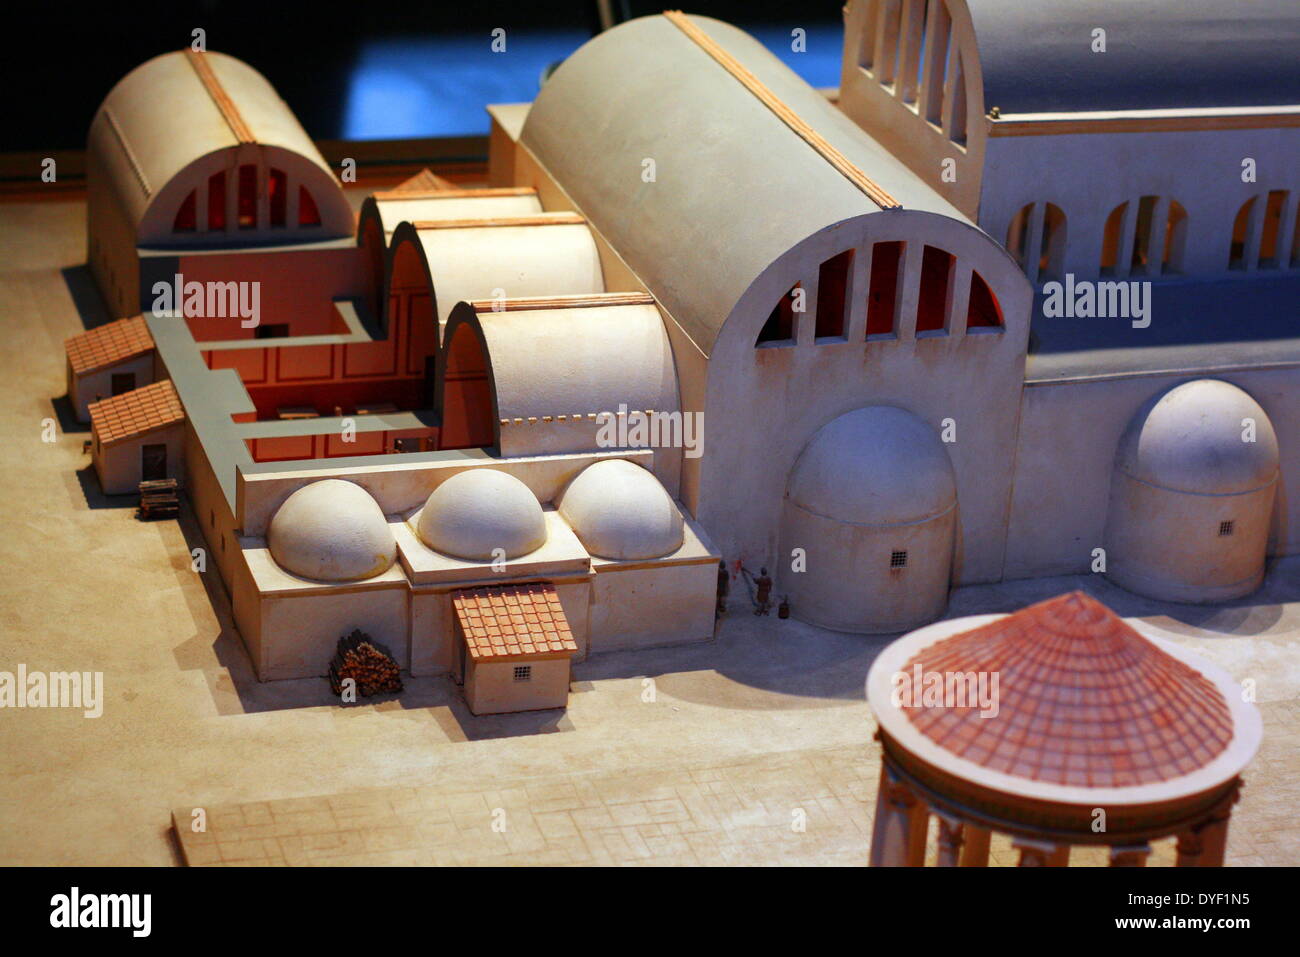 Model reconstruction of the 4th century Sulis Minerva baths, temple and spring. During this time the courtyards and bathing halls were huge and bustling with people. There was space for hundreds of people and the buildings were colourful and decorative. Roman. Stock Photo